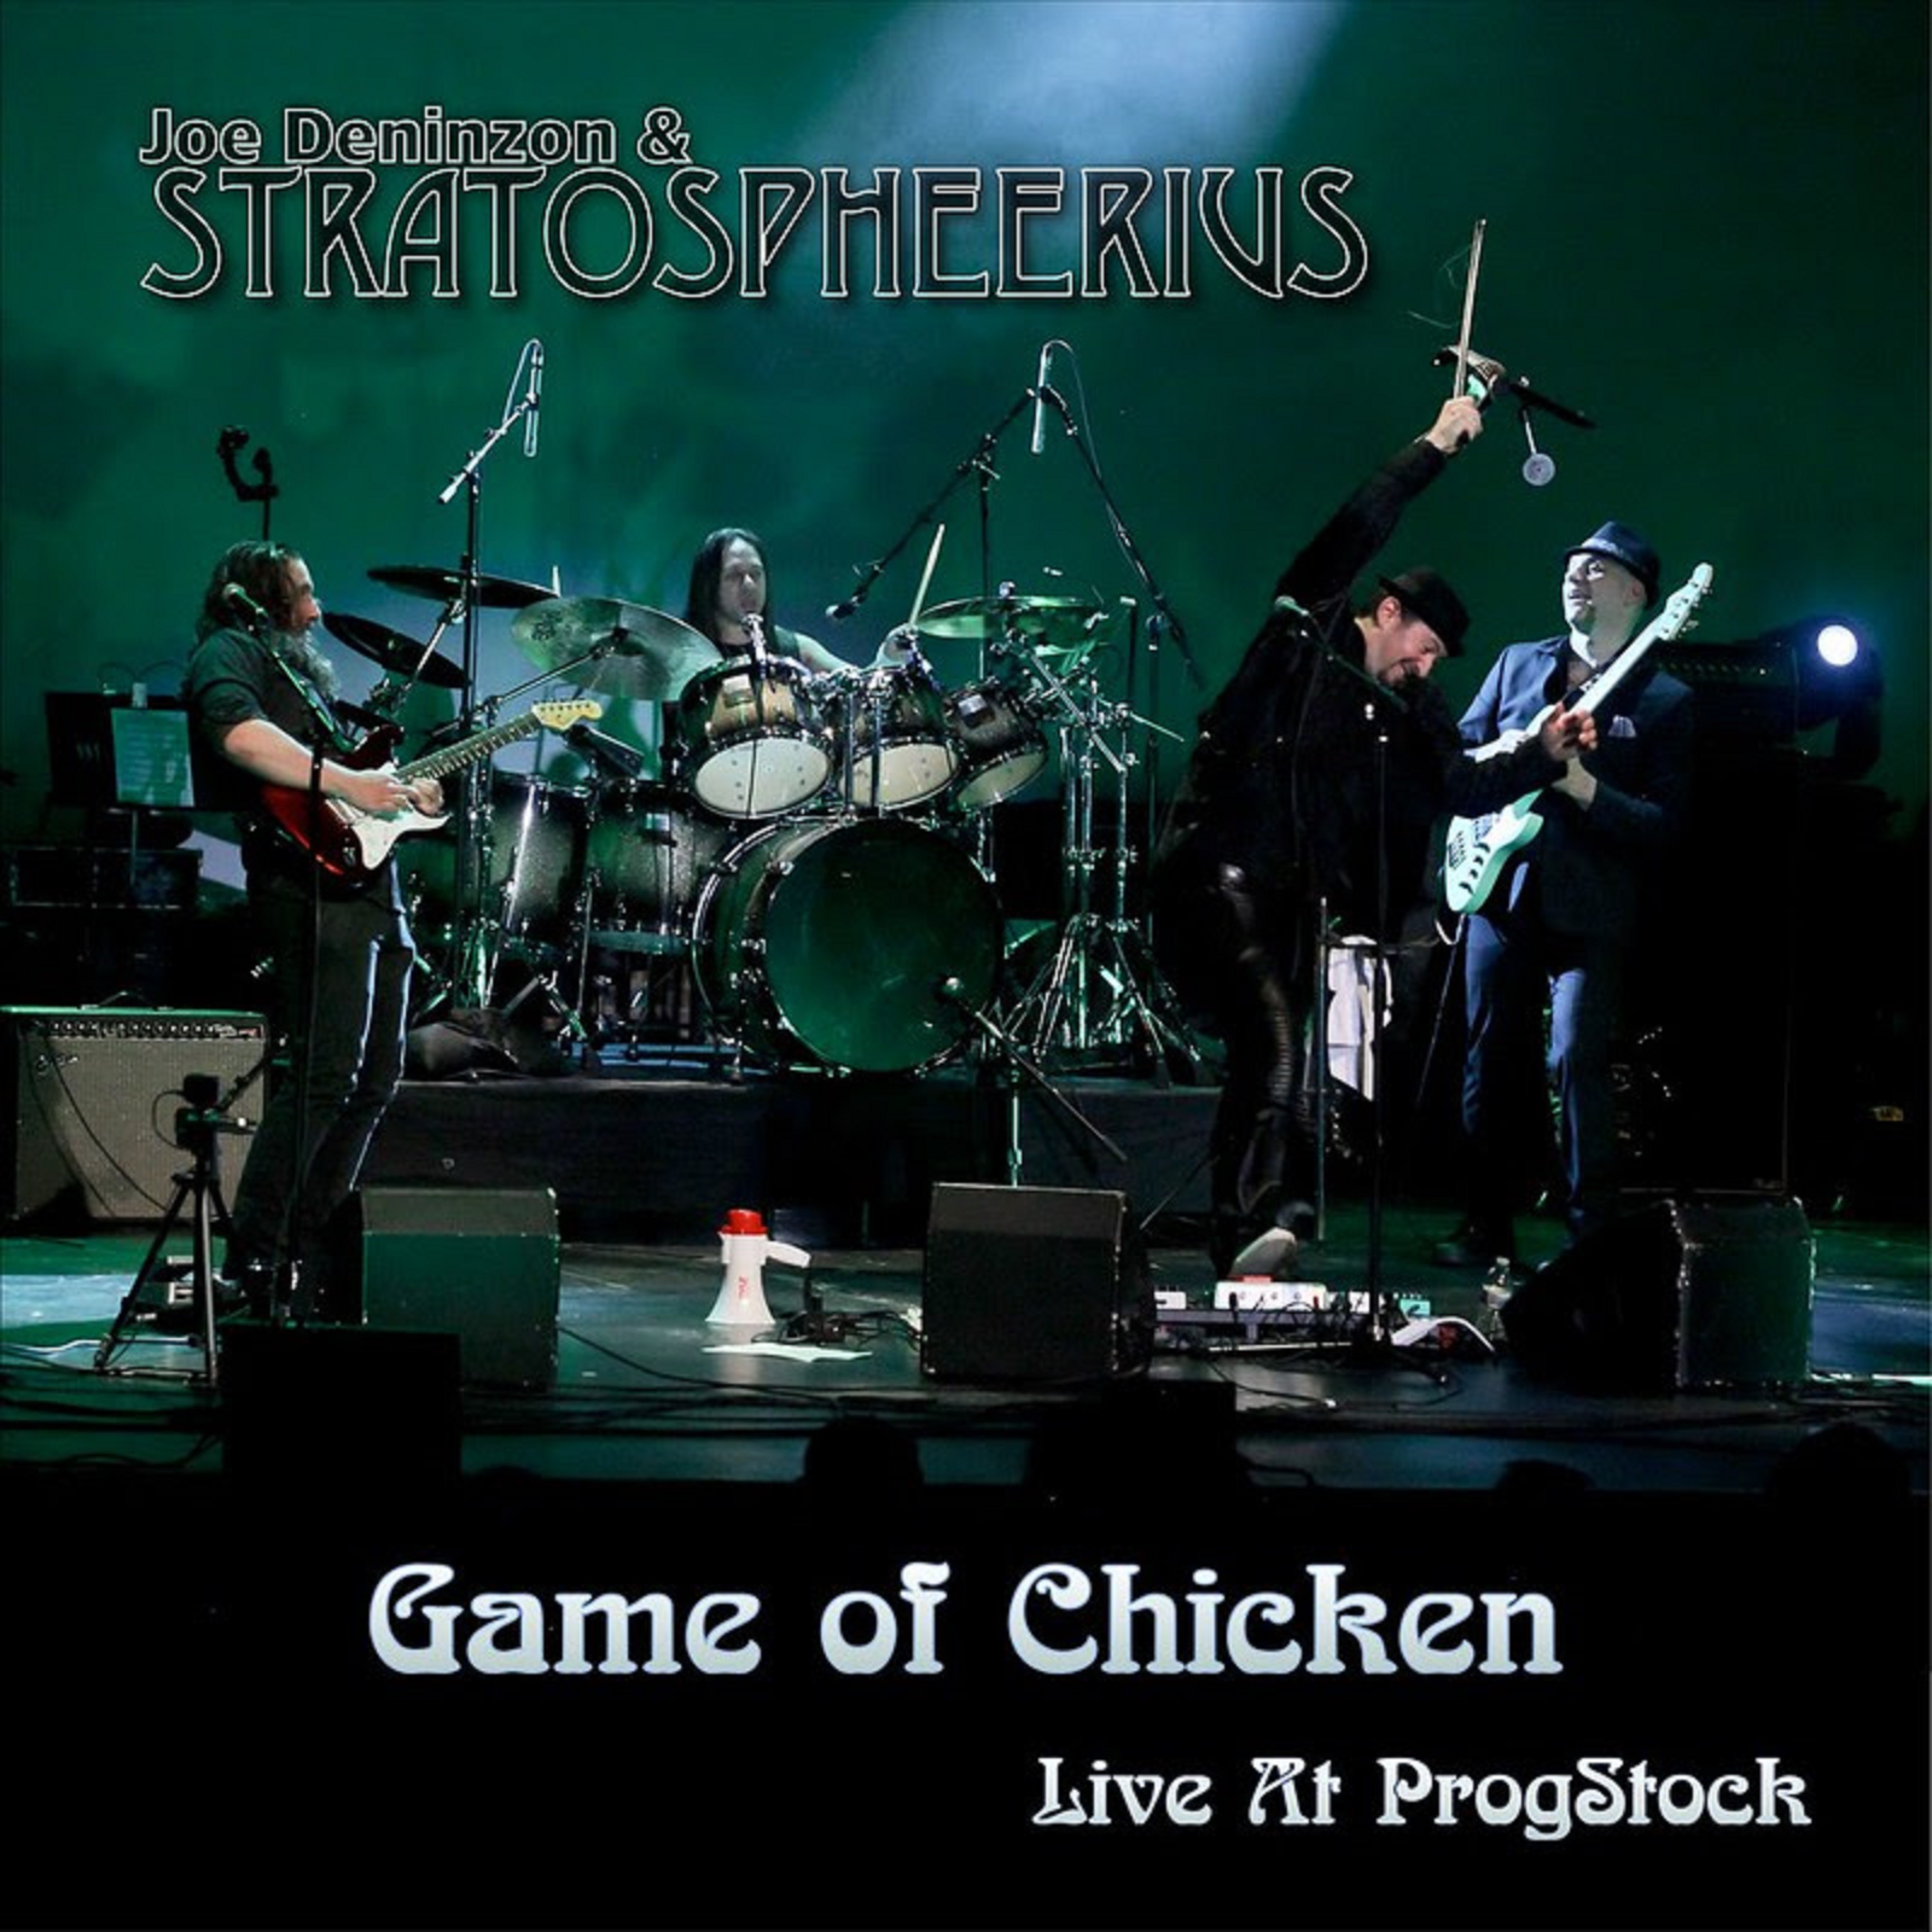 Joe Deninzon’s Game of Chicken, Live from ProgStock, out on December 3